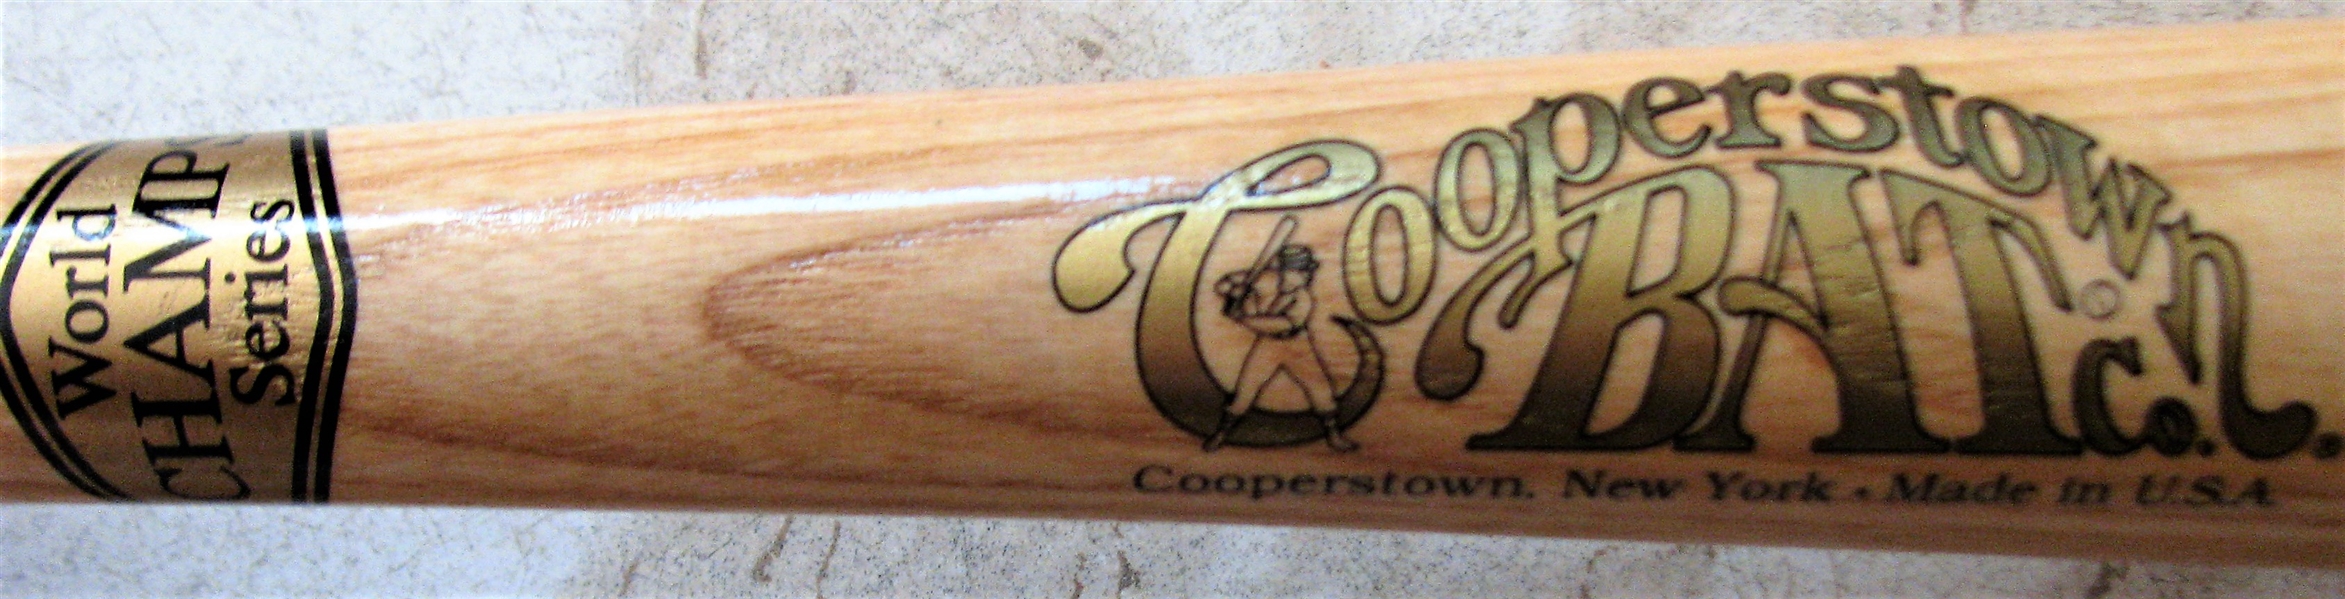 1999 NY YANKEE 25th WORLD SERIES CHAMPIONSHIP COOPERSTOWN BAT